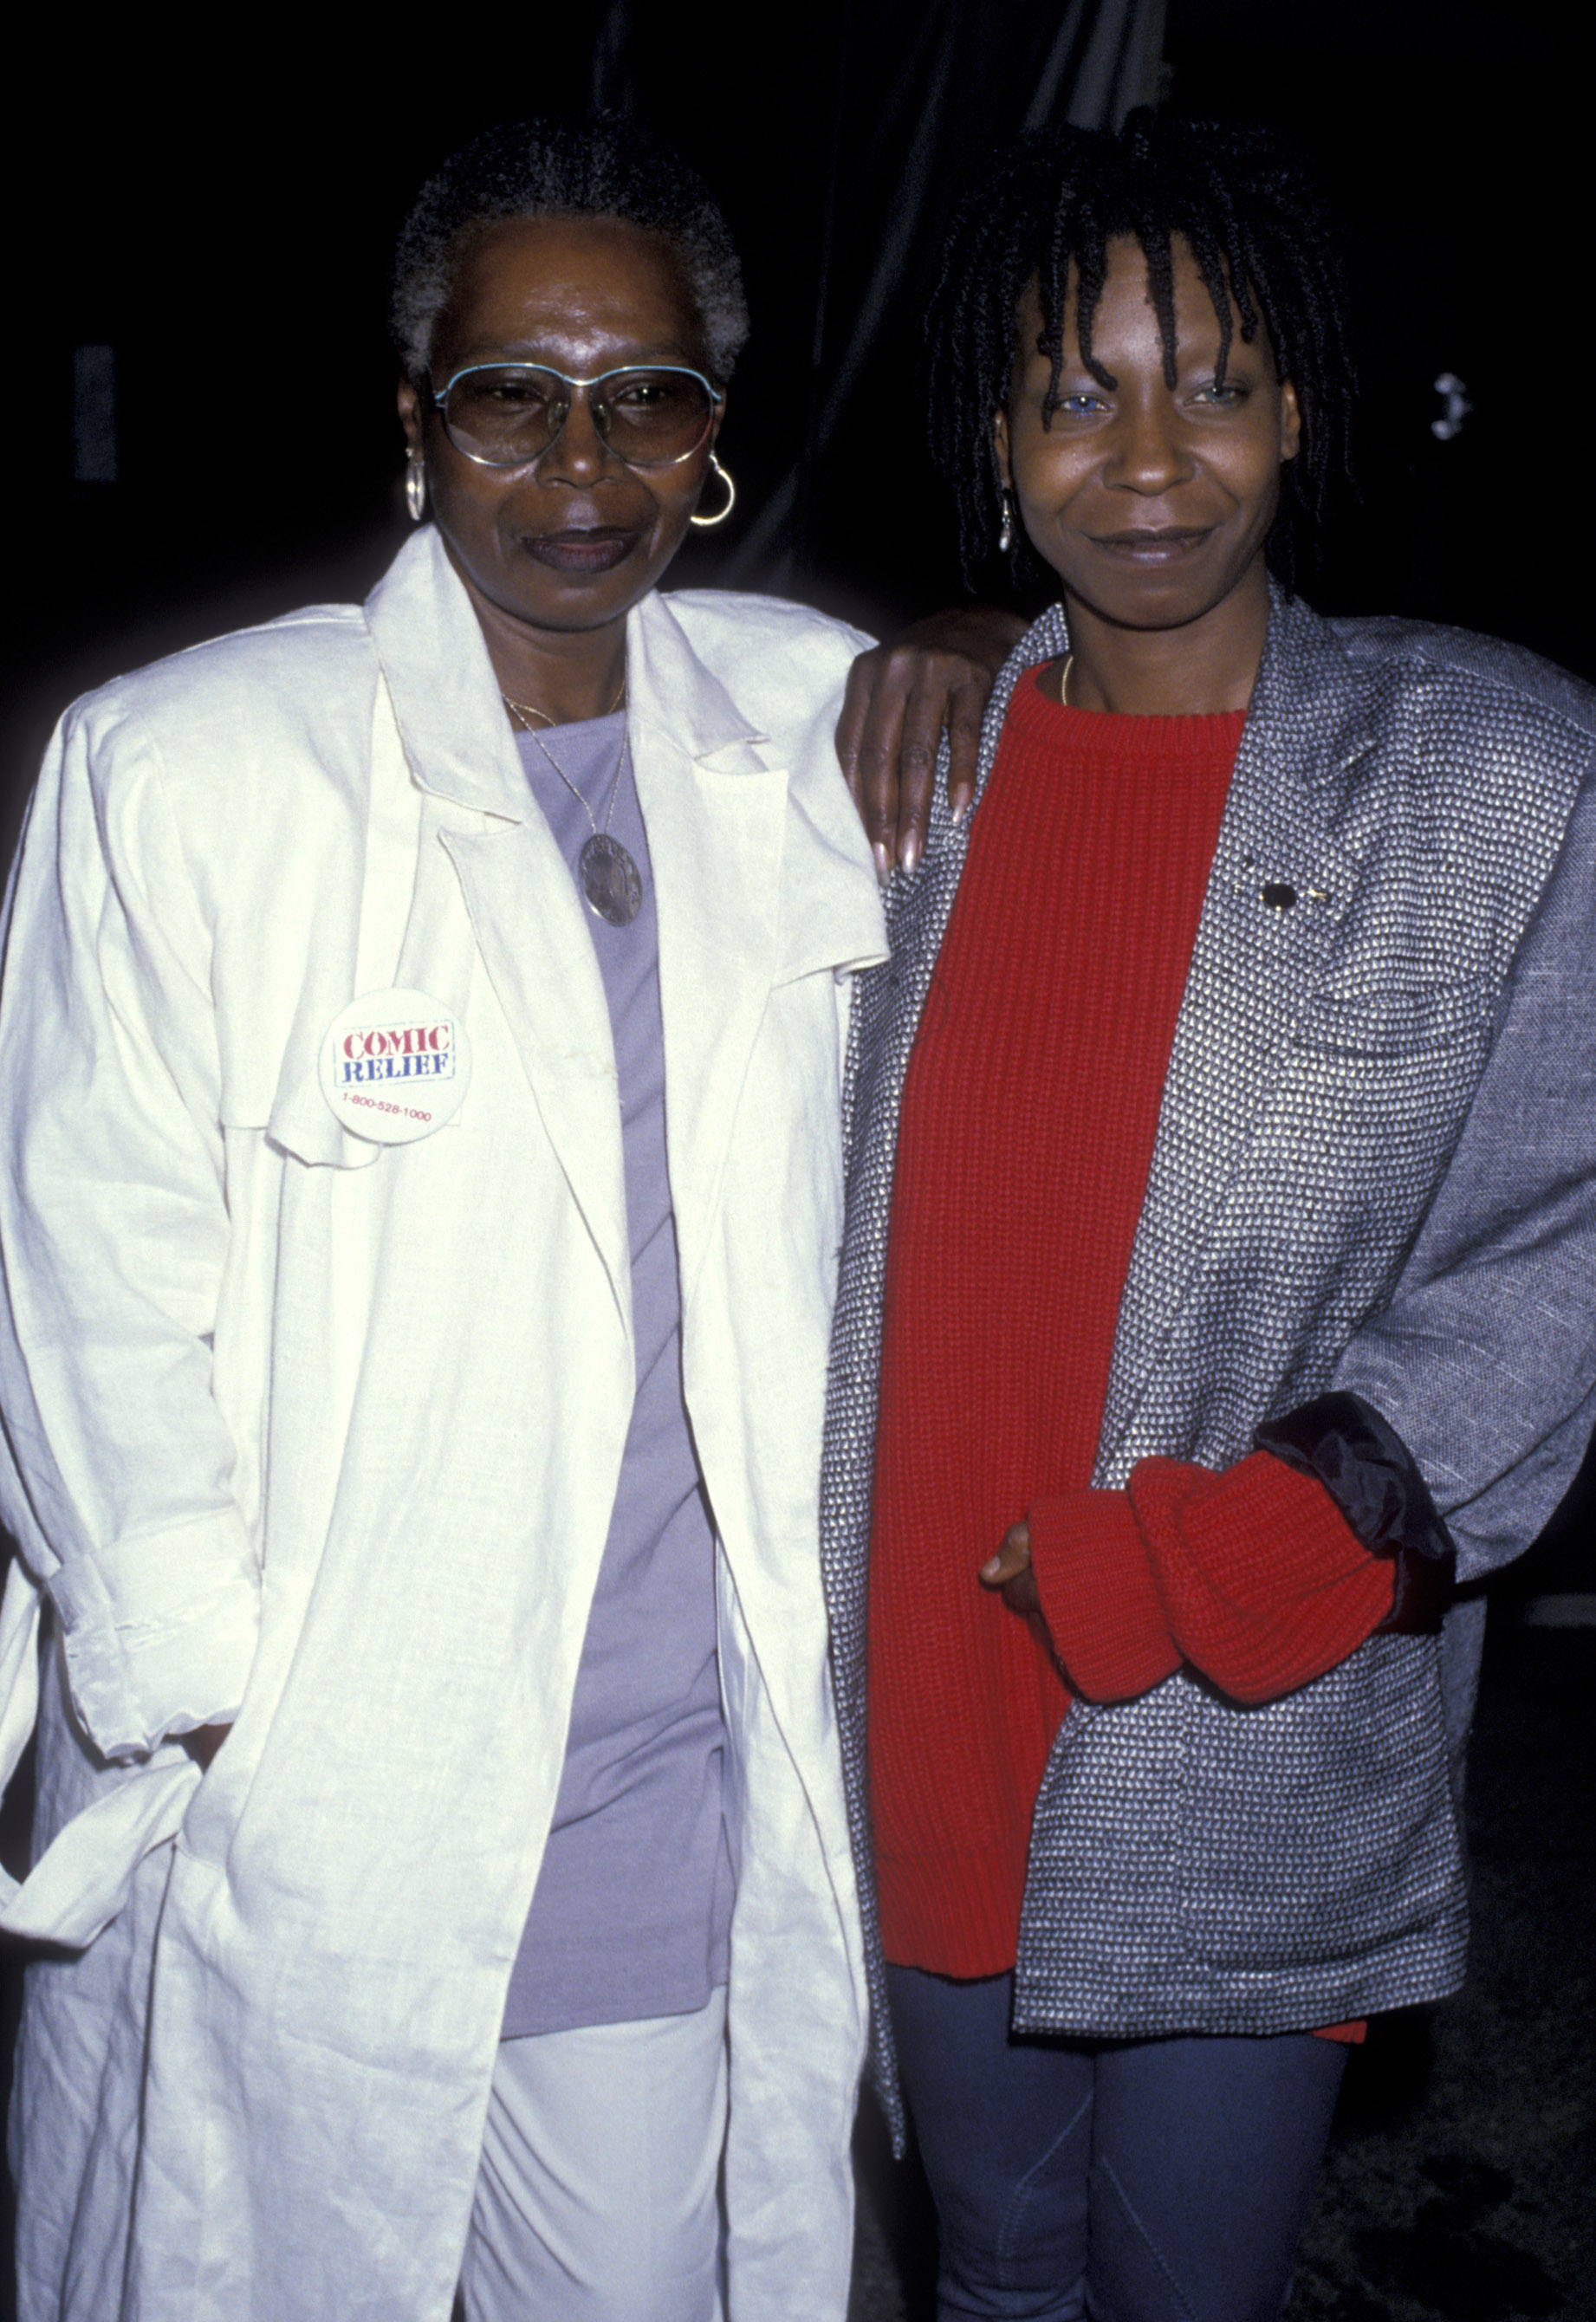 Whoopi and her lookalike mother Emma Johnson, who died in 2010 following a stroke